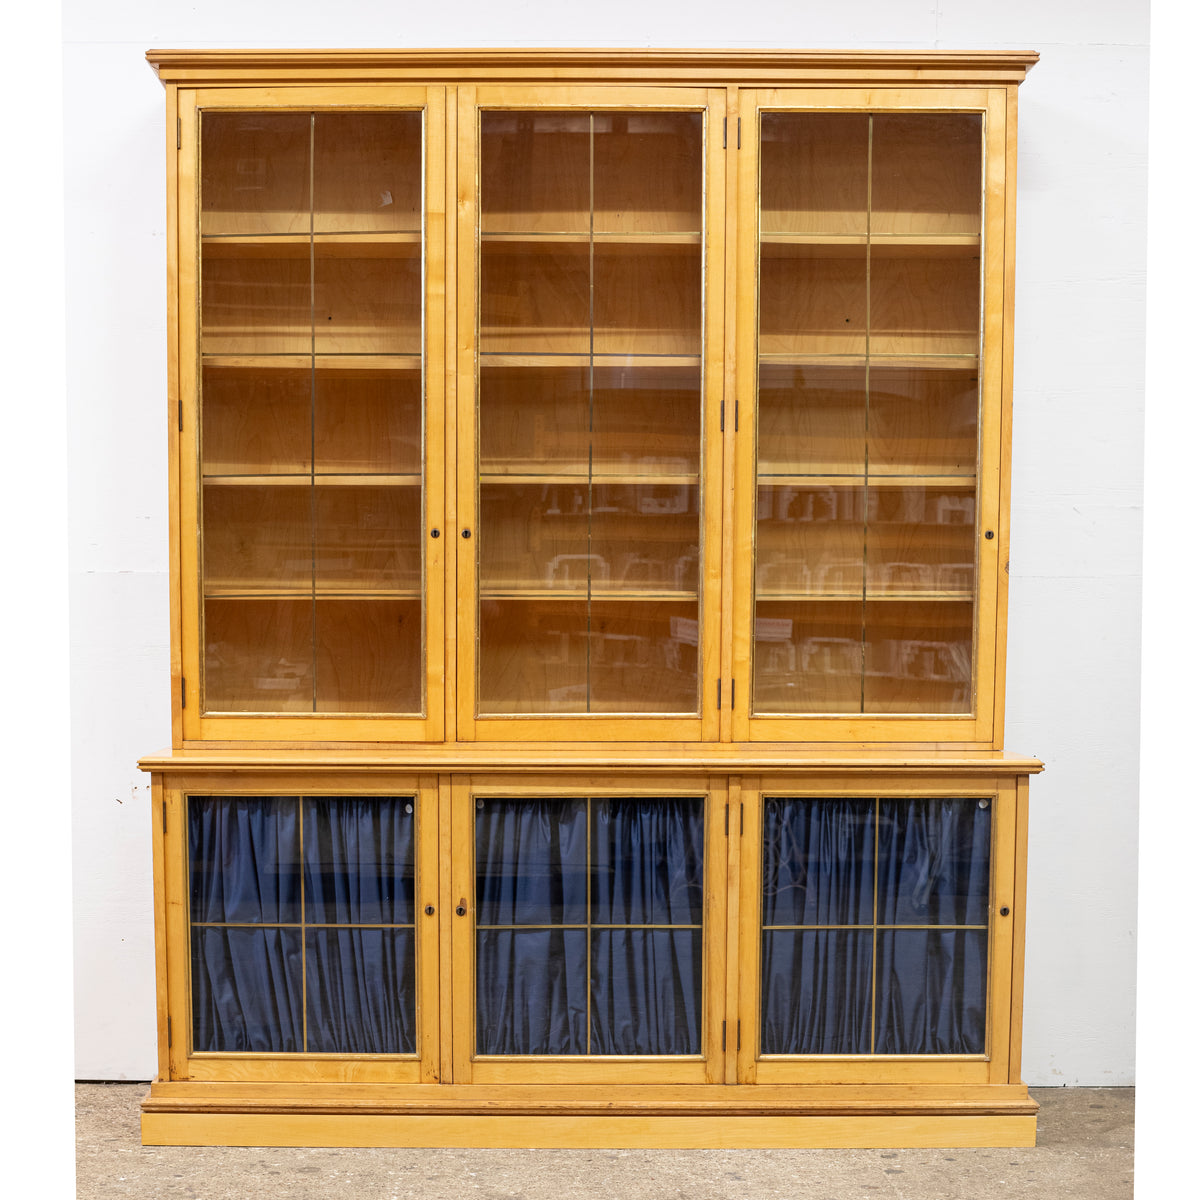 Reclaimed Mid-Century Georgian Style Bookcase | Glazed Cabinet | The Architectural Forum